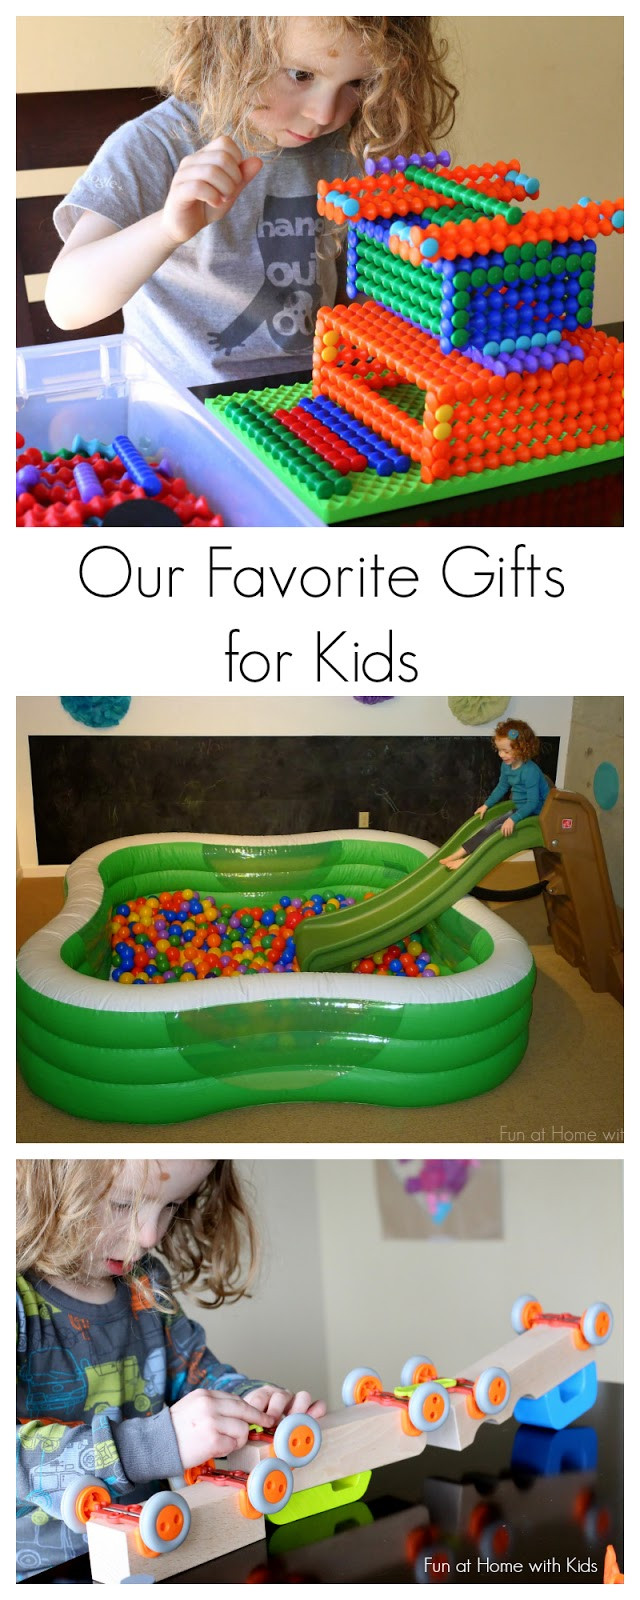 Top 10 Gifts For Children
 Our 10 Best and Favorite Gift Ideas for Kids